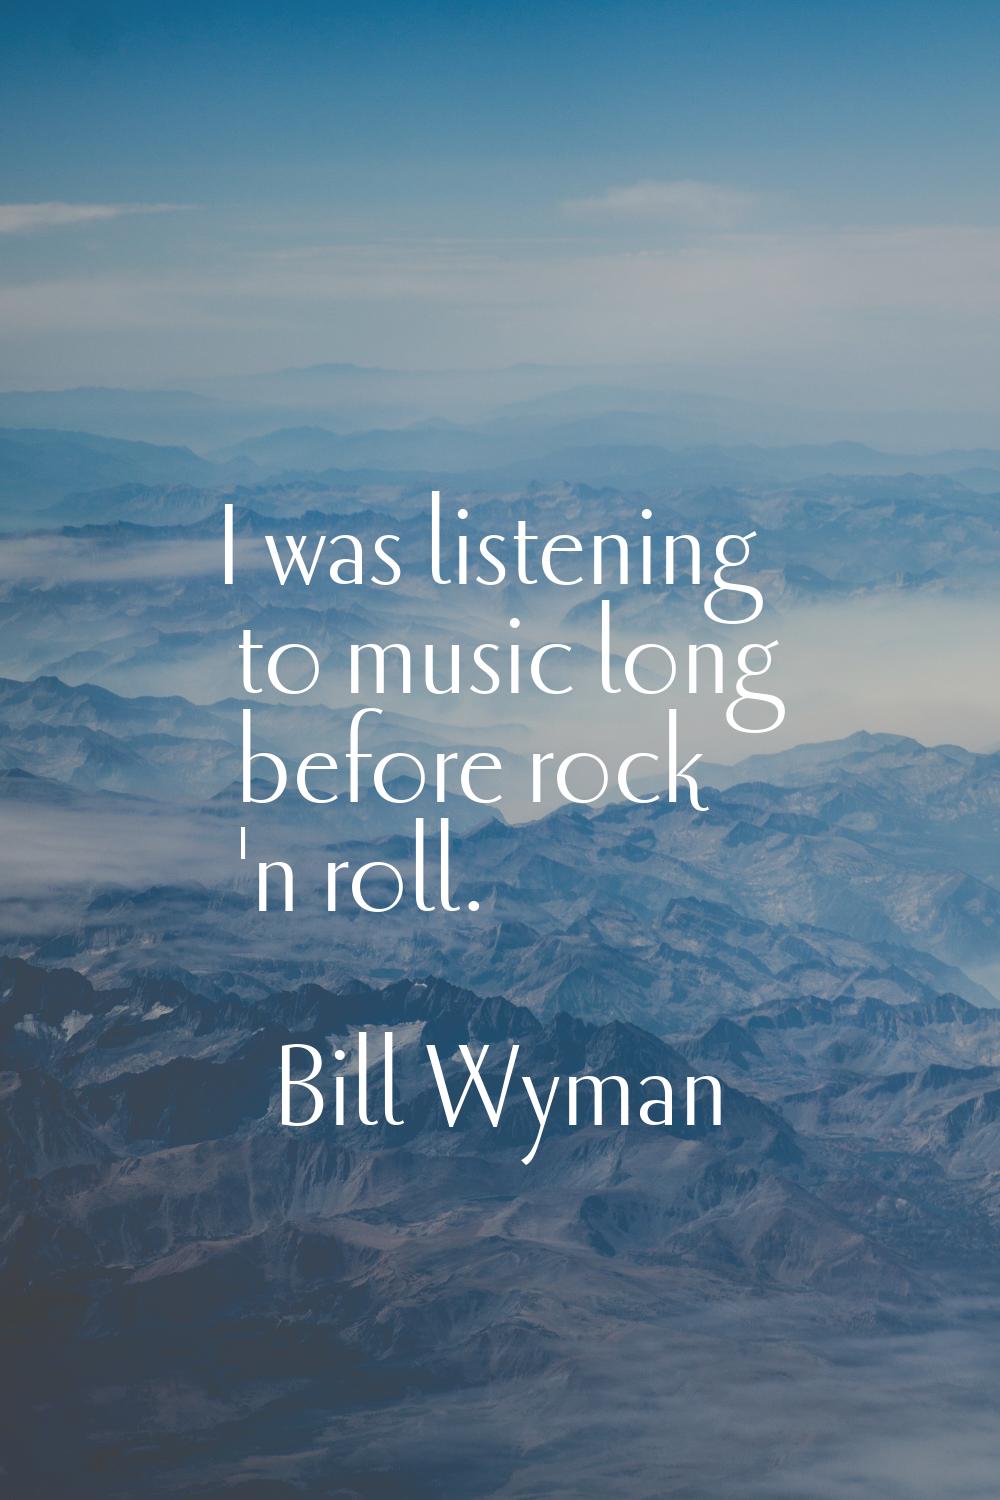 I was listening to music long before rock 'n roll.